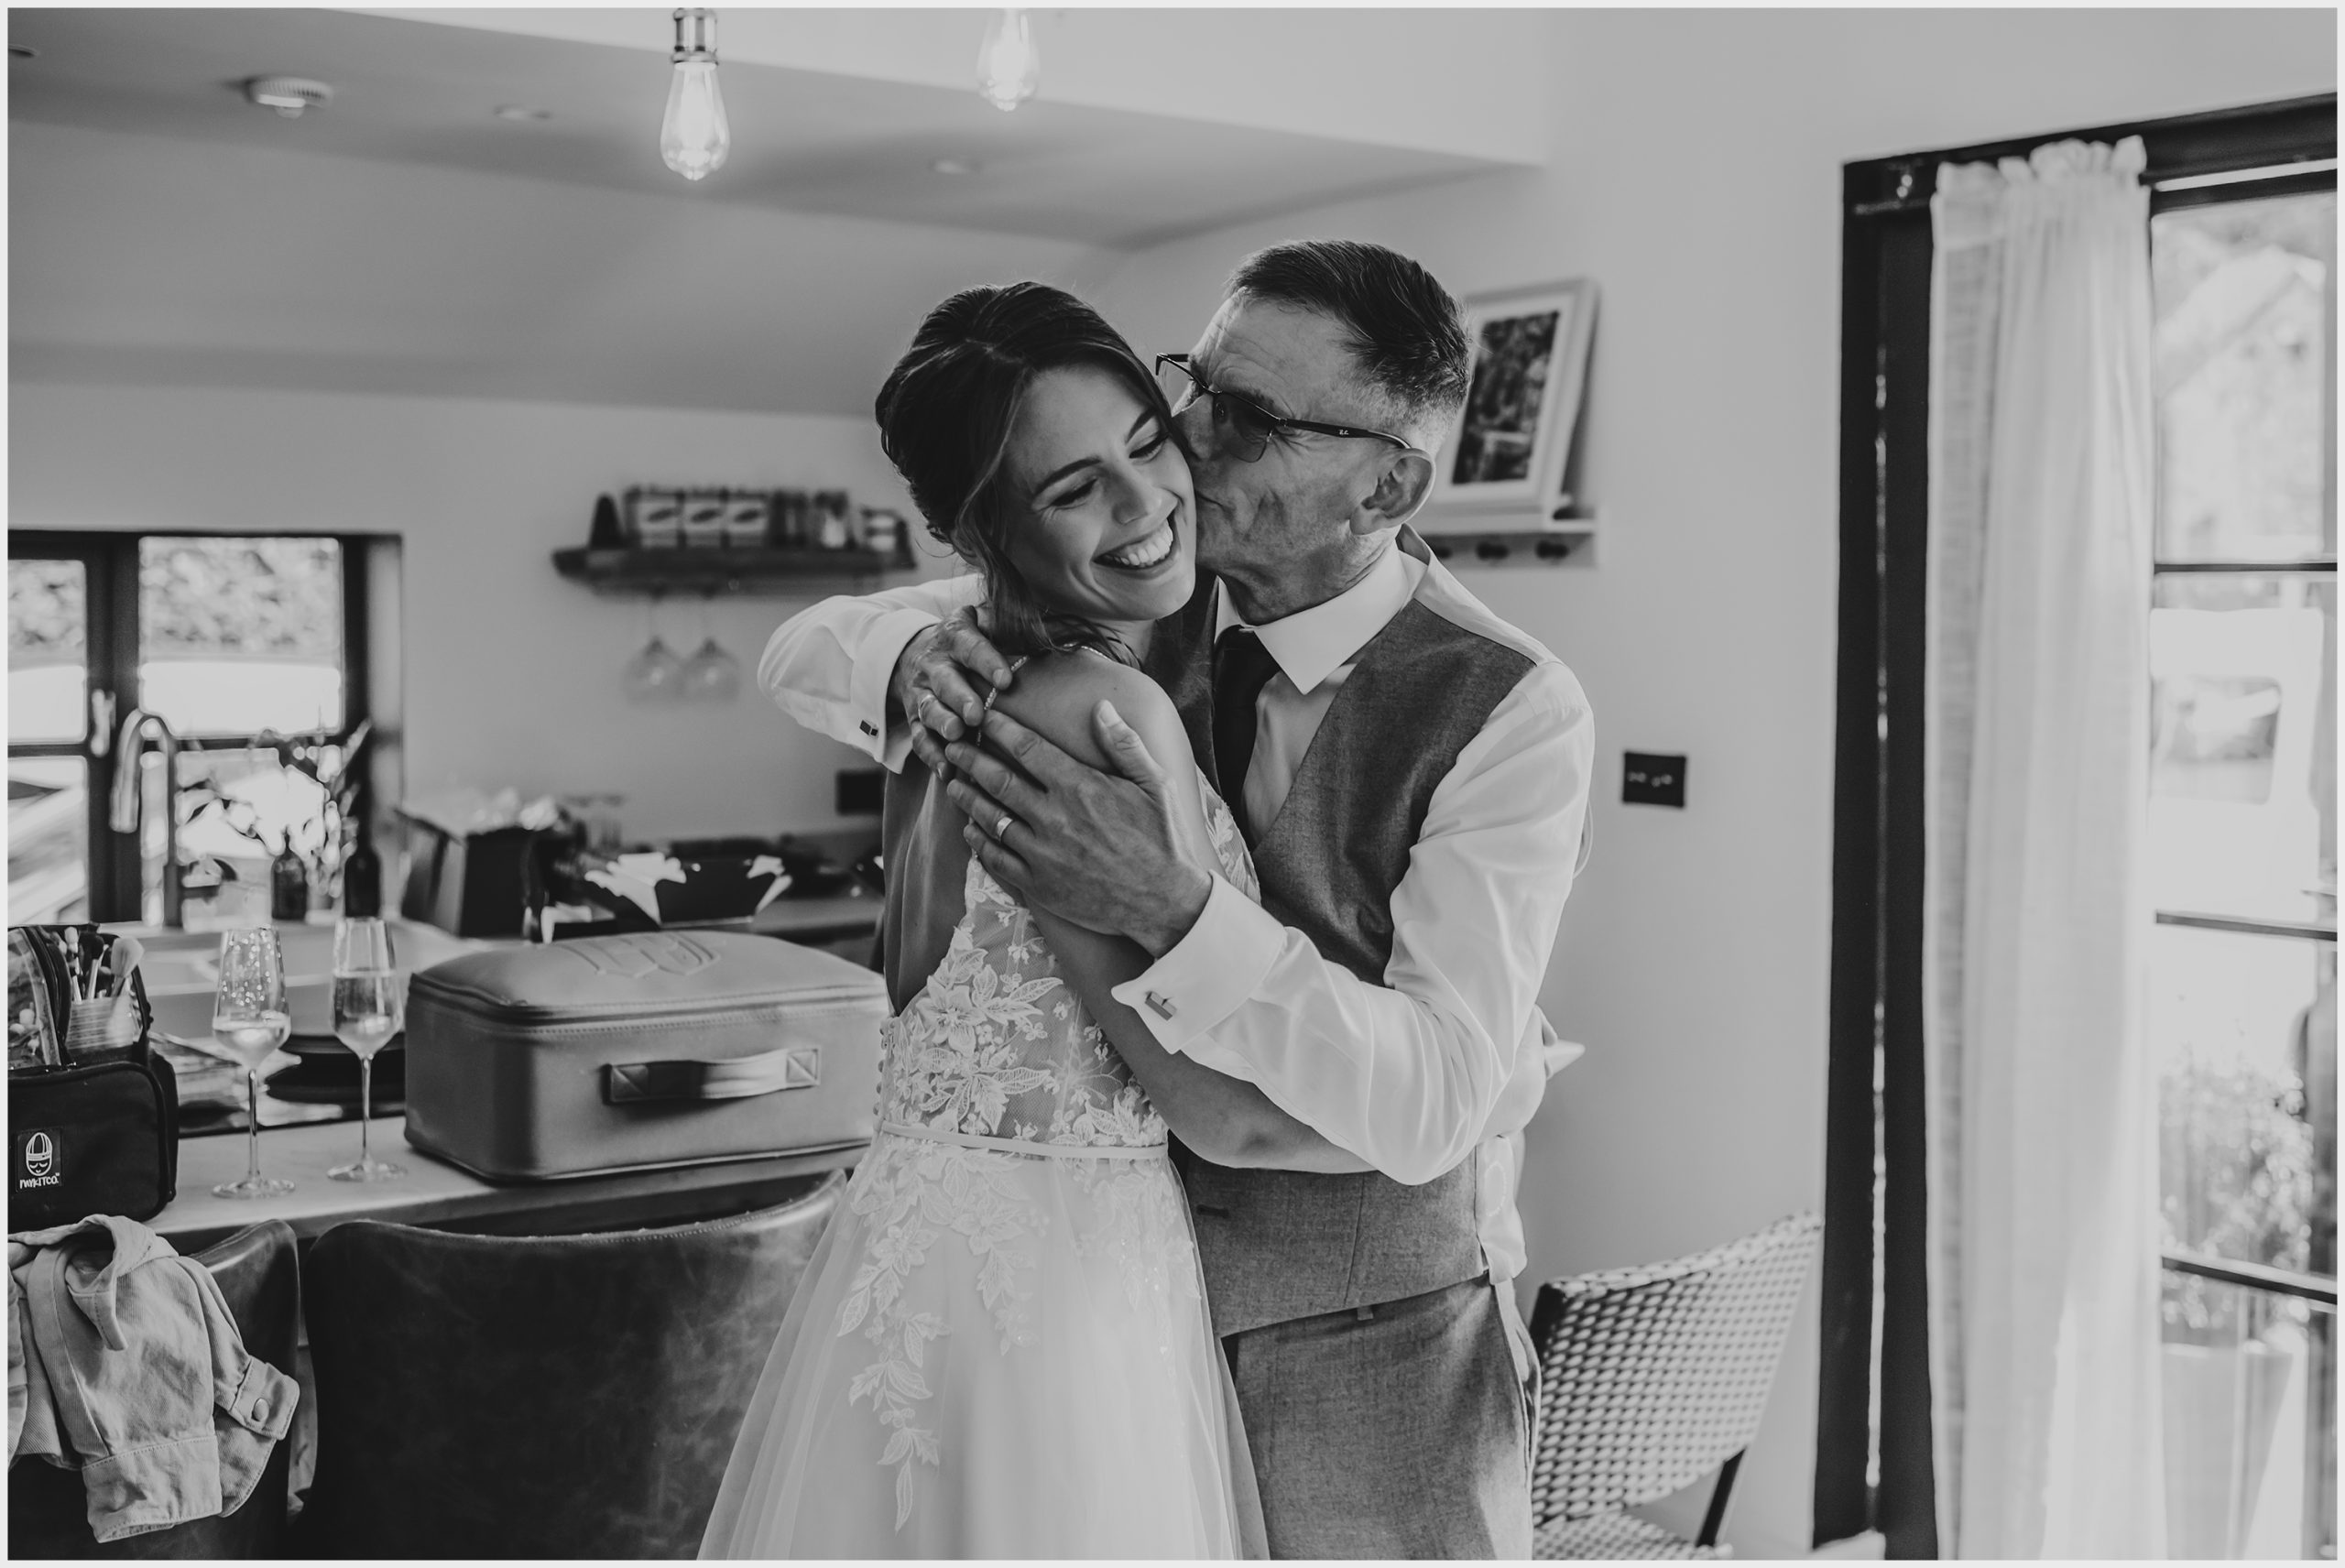 A very proud father of the bride kisses his daughter on the cheek after he has seen her for the first time.  The bride is smiling widely.  Image captured by Helena Jayne Photography a north Wales based wedding photographer